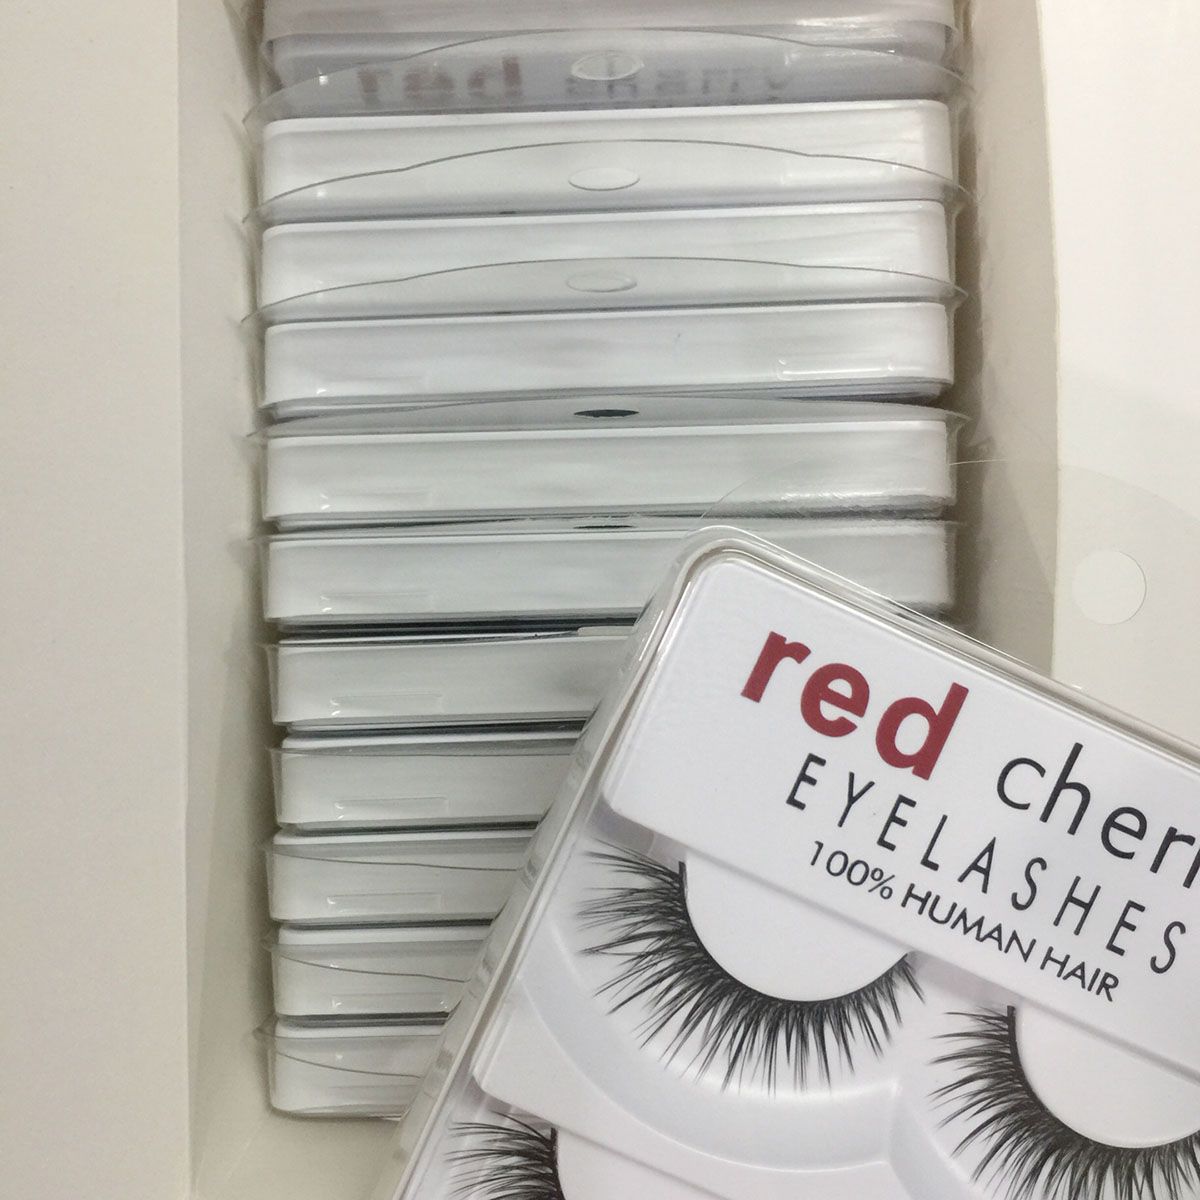 Sell Hot 2018 Red Cherry 3D False Eyelashes Pack 8 Styles Natural